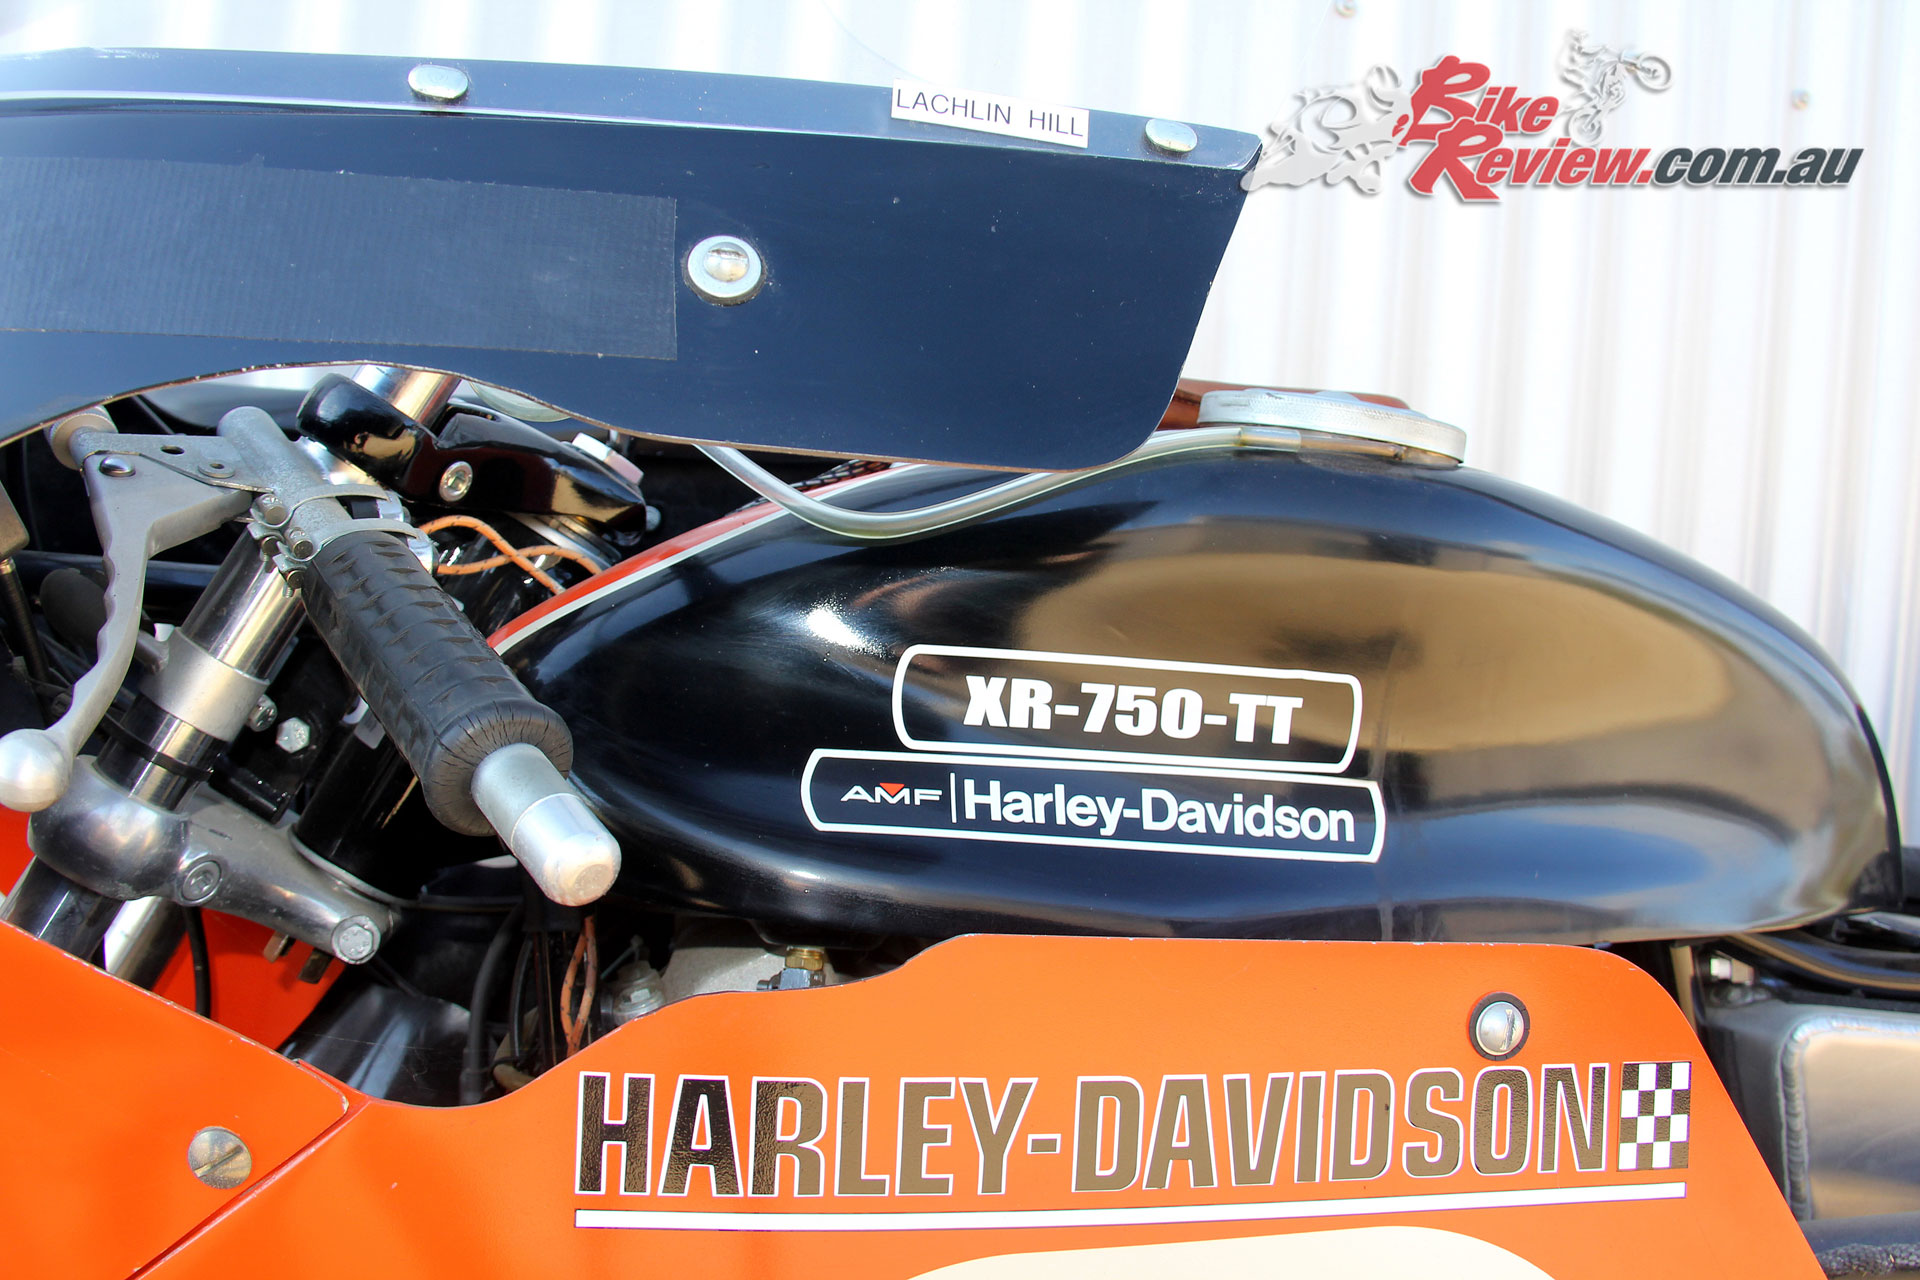 The Harley Davidson XR 750 TT was a leading racer for an extended period of time, proving a dominant force